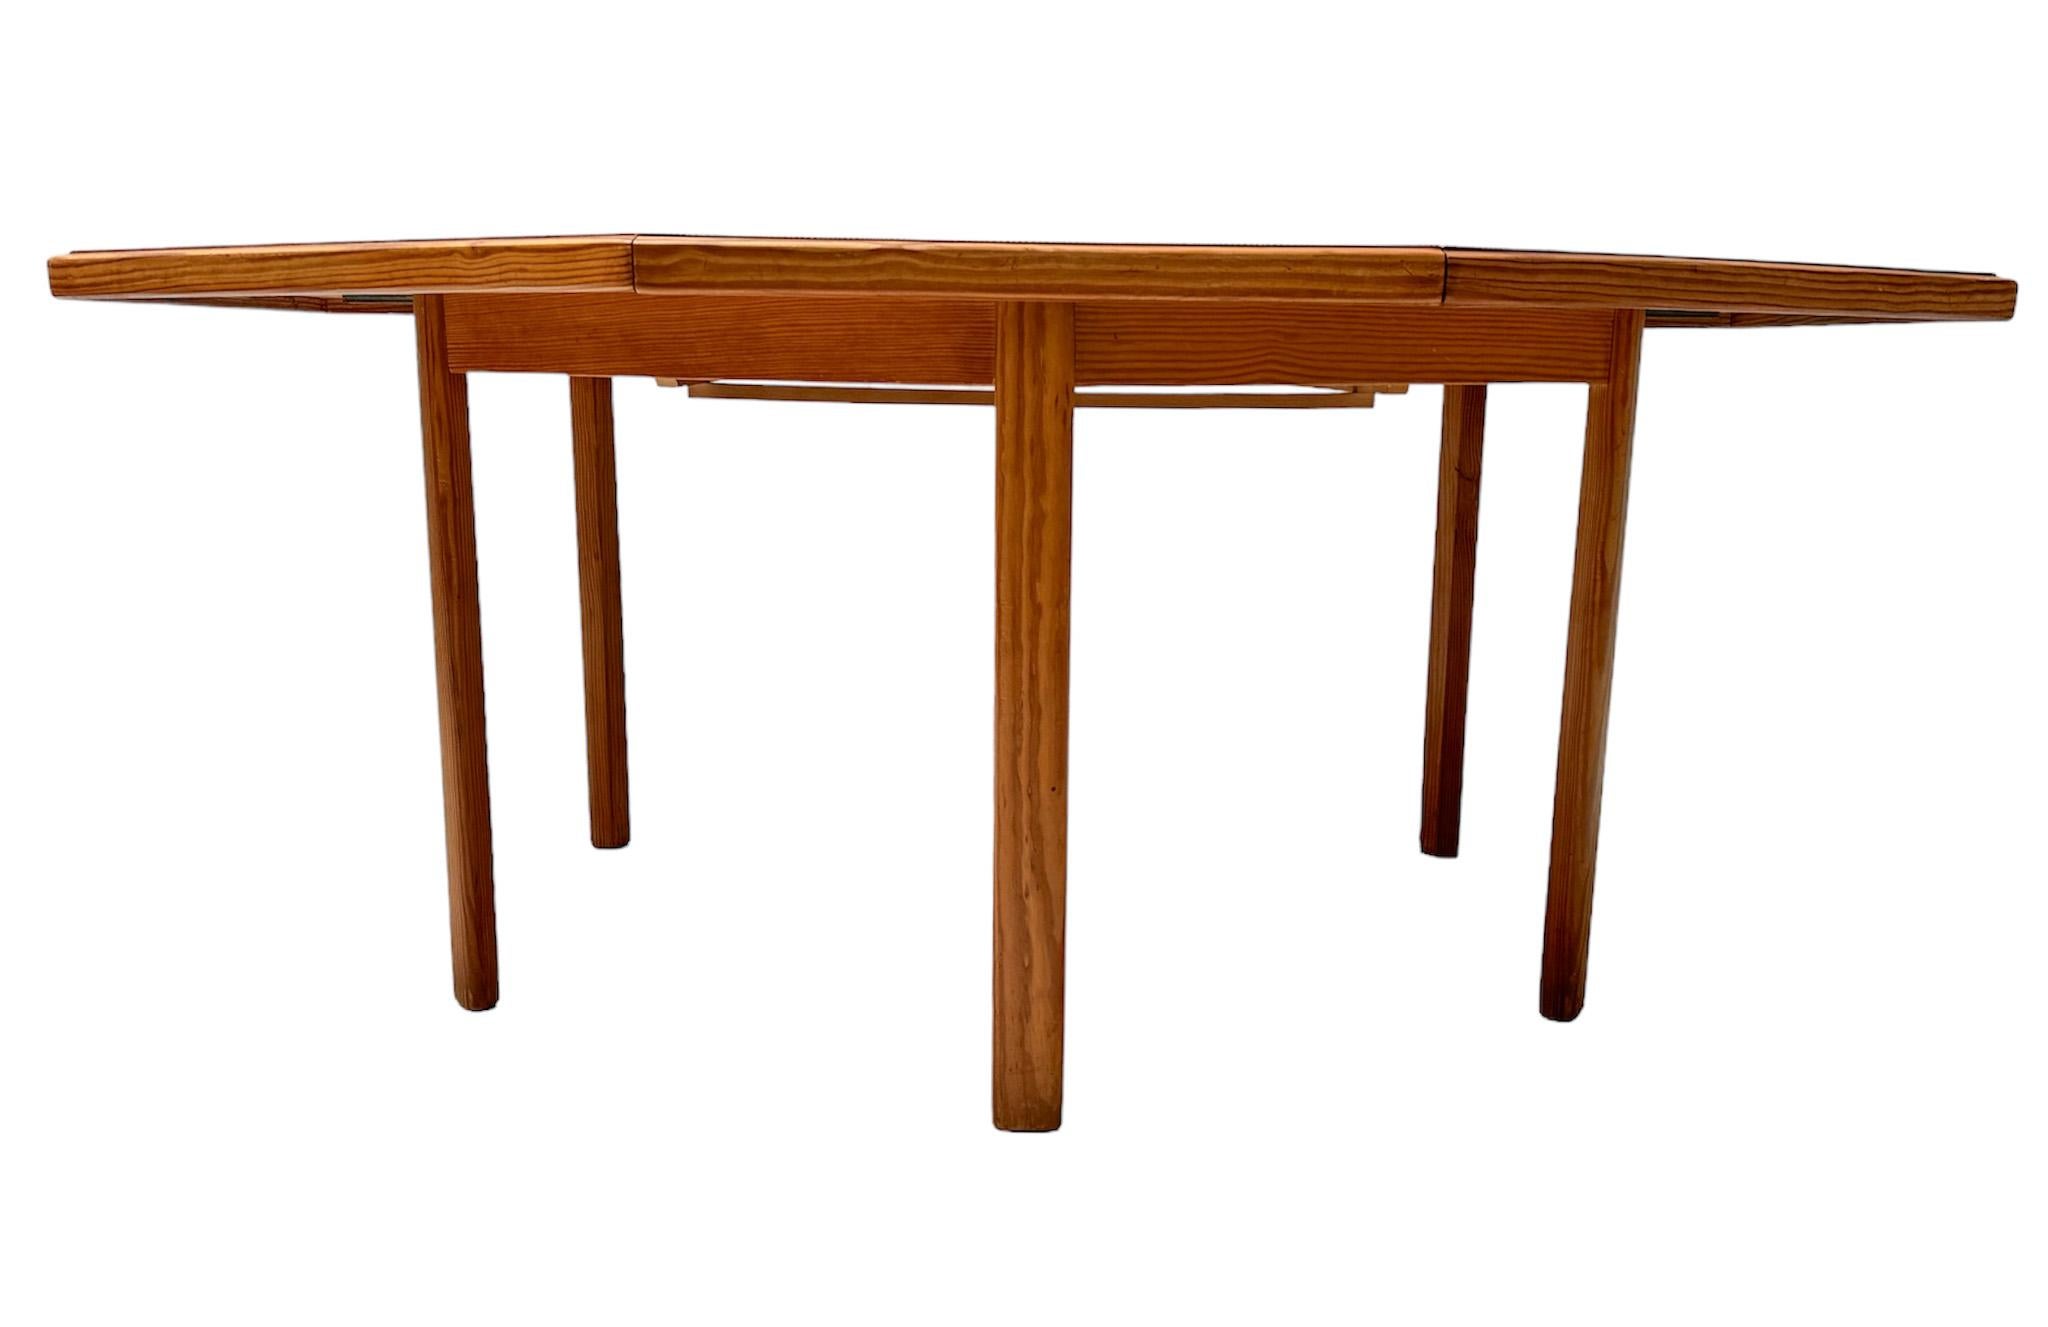 French Pine Mid-Century Modern Extendable Dining Room Table, 1970s In Good Condition For Sale In Amsterdam, NL